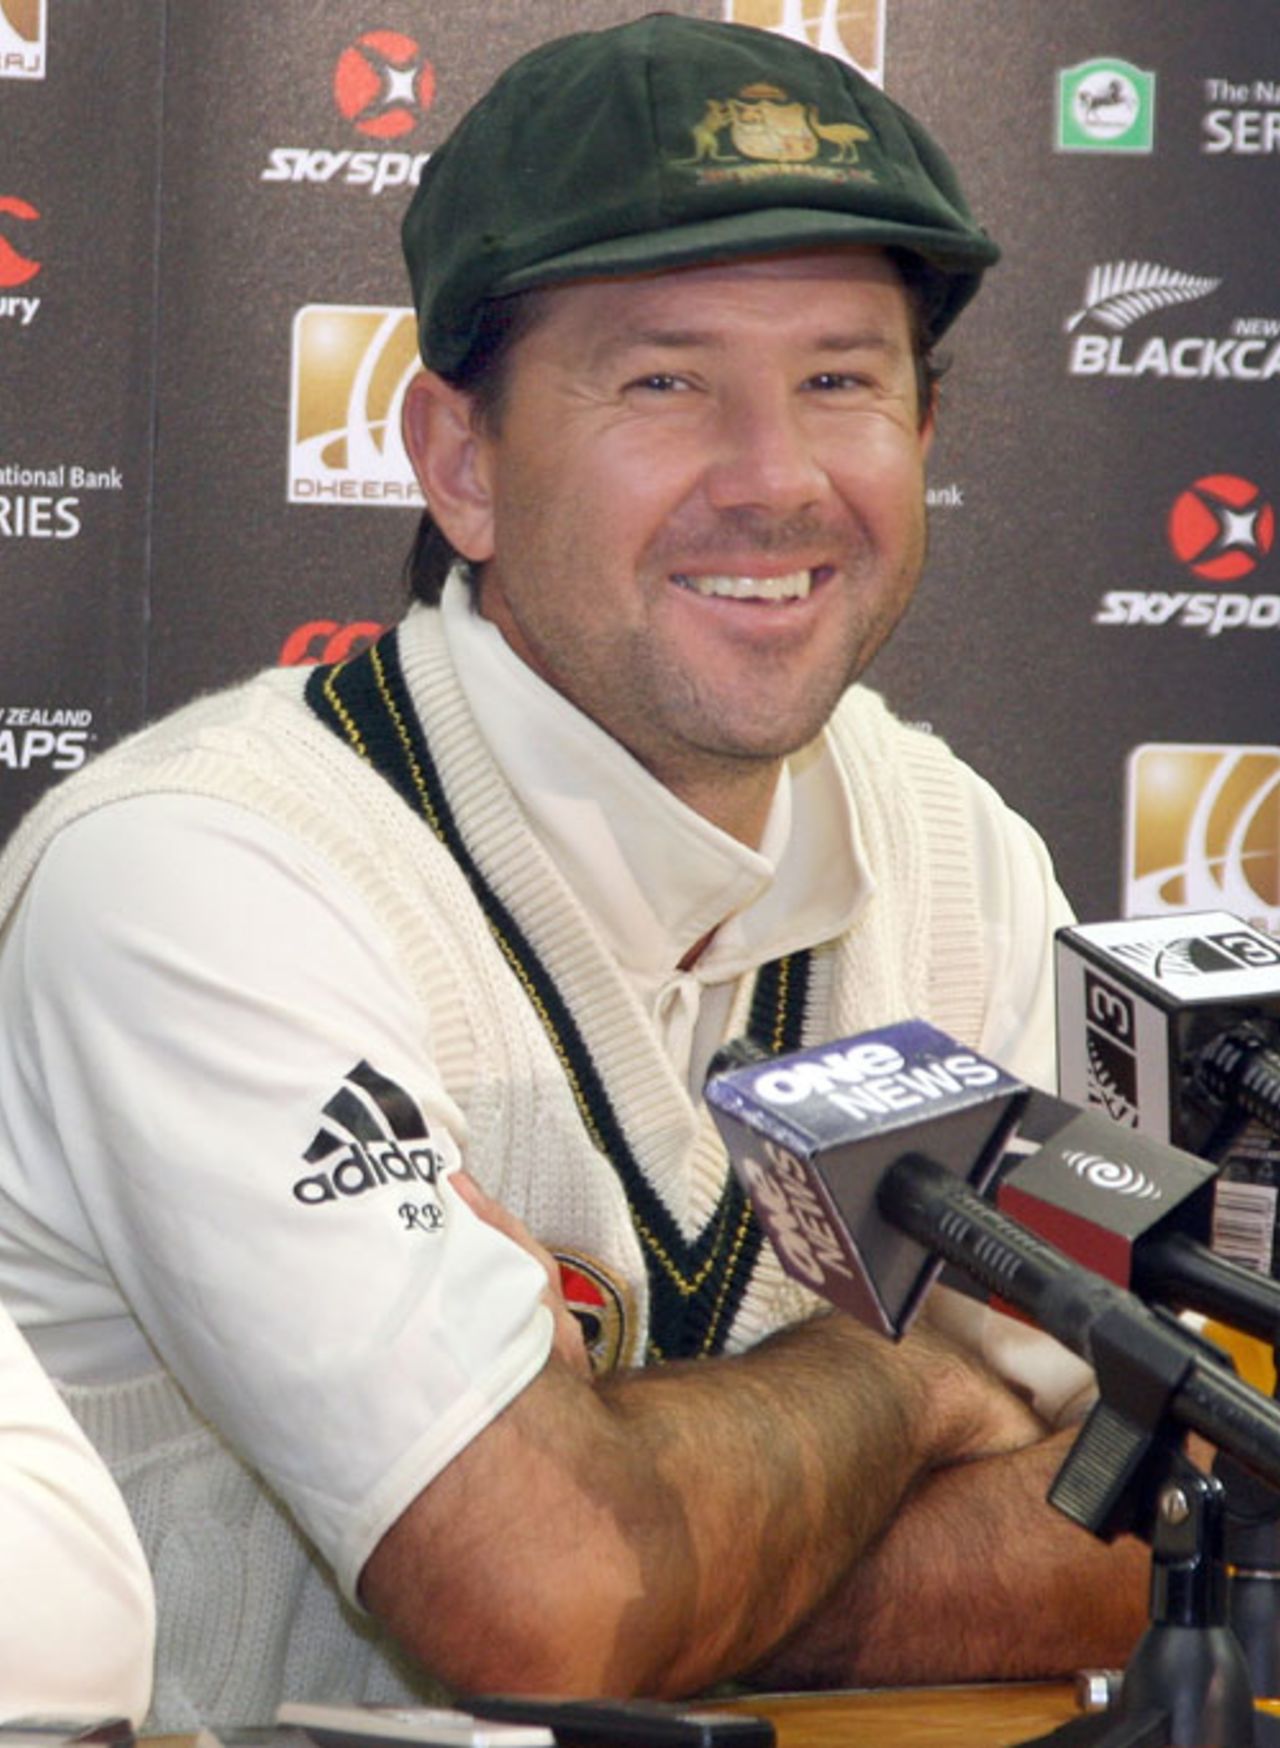 Ricky Ponting is happy after the 10-wicket win, New Zealand v Australia, 1st Test, 5th day, Wellington, March 23, 2010